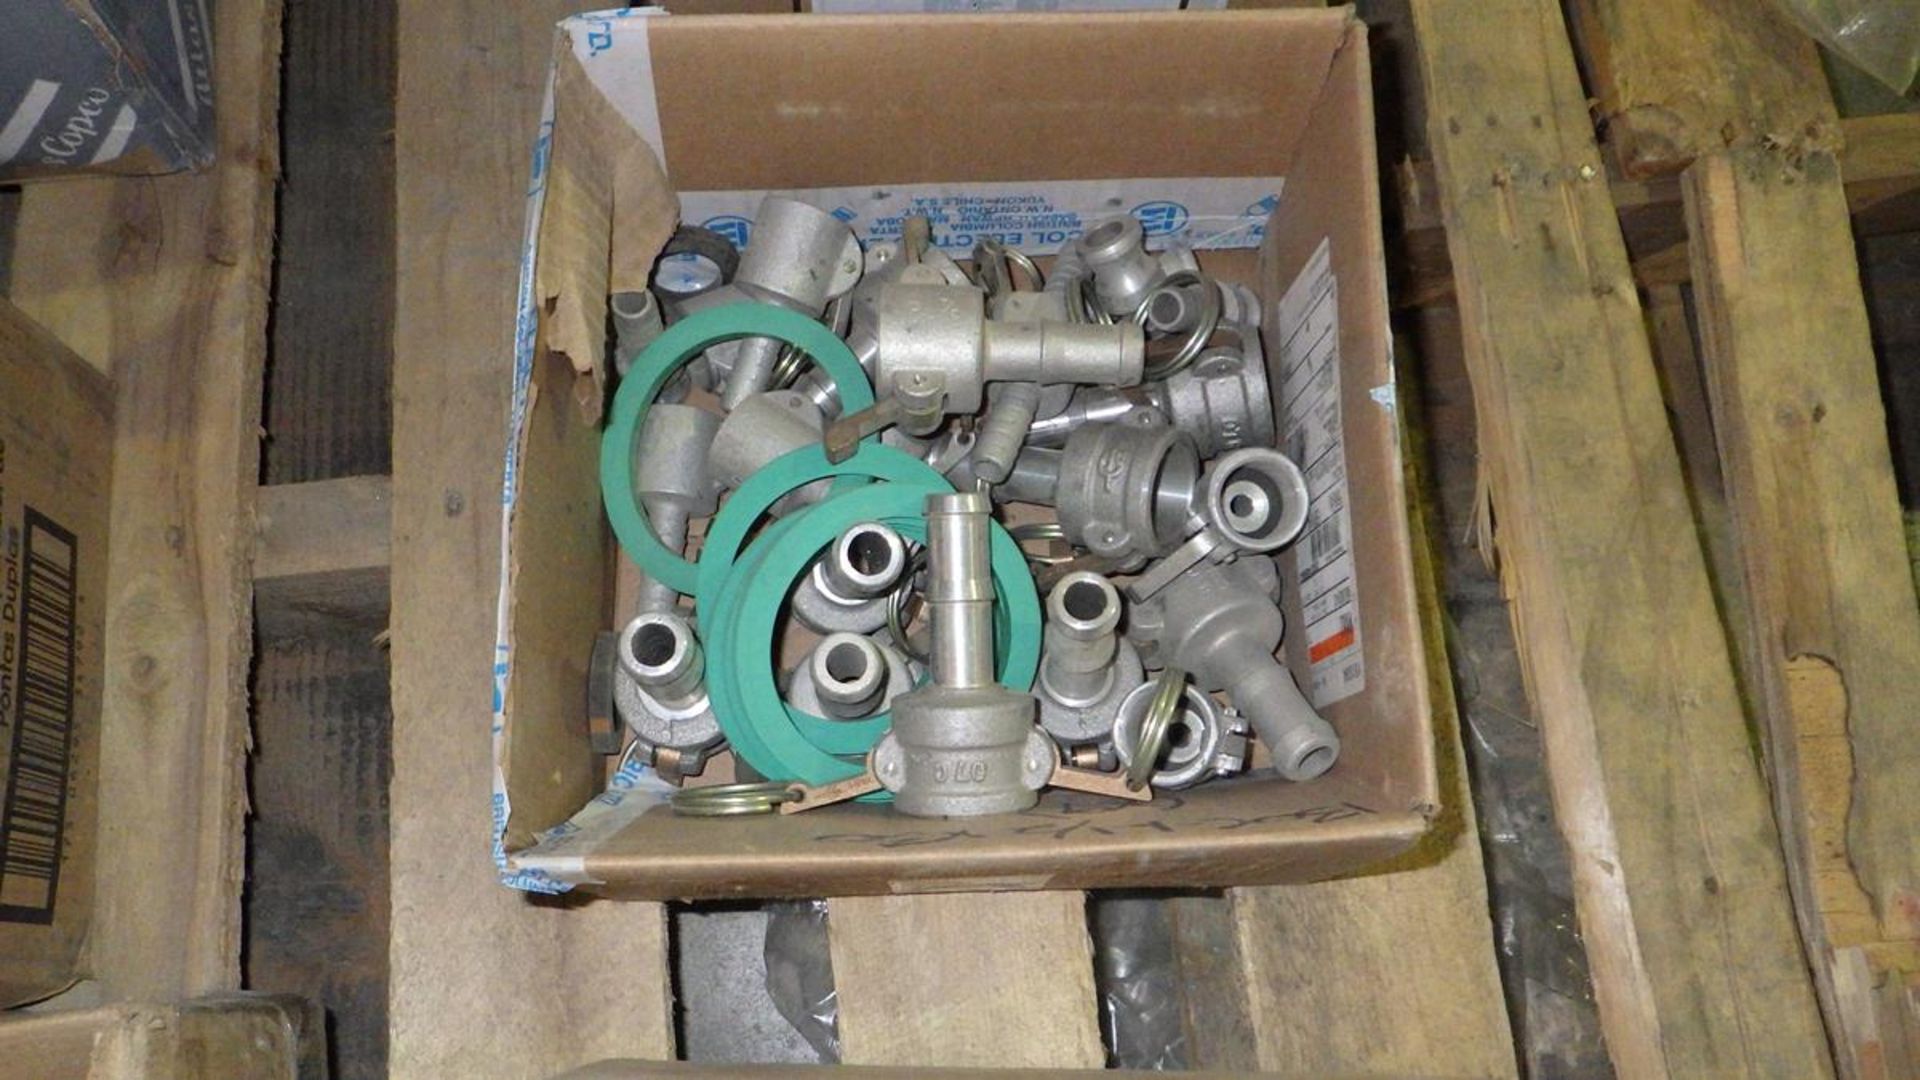 PALLET OF BOXES OF HYDRAULIC FITTINGS, RIGHT ANGLE GEAR DRIVE, CAM LOCKS, GRADER BLADE BOLTS. - Image 3 of 10